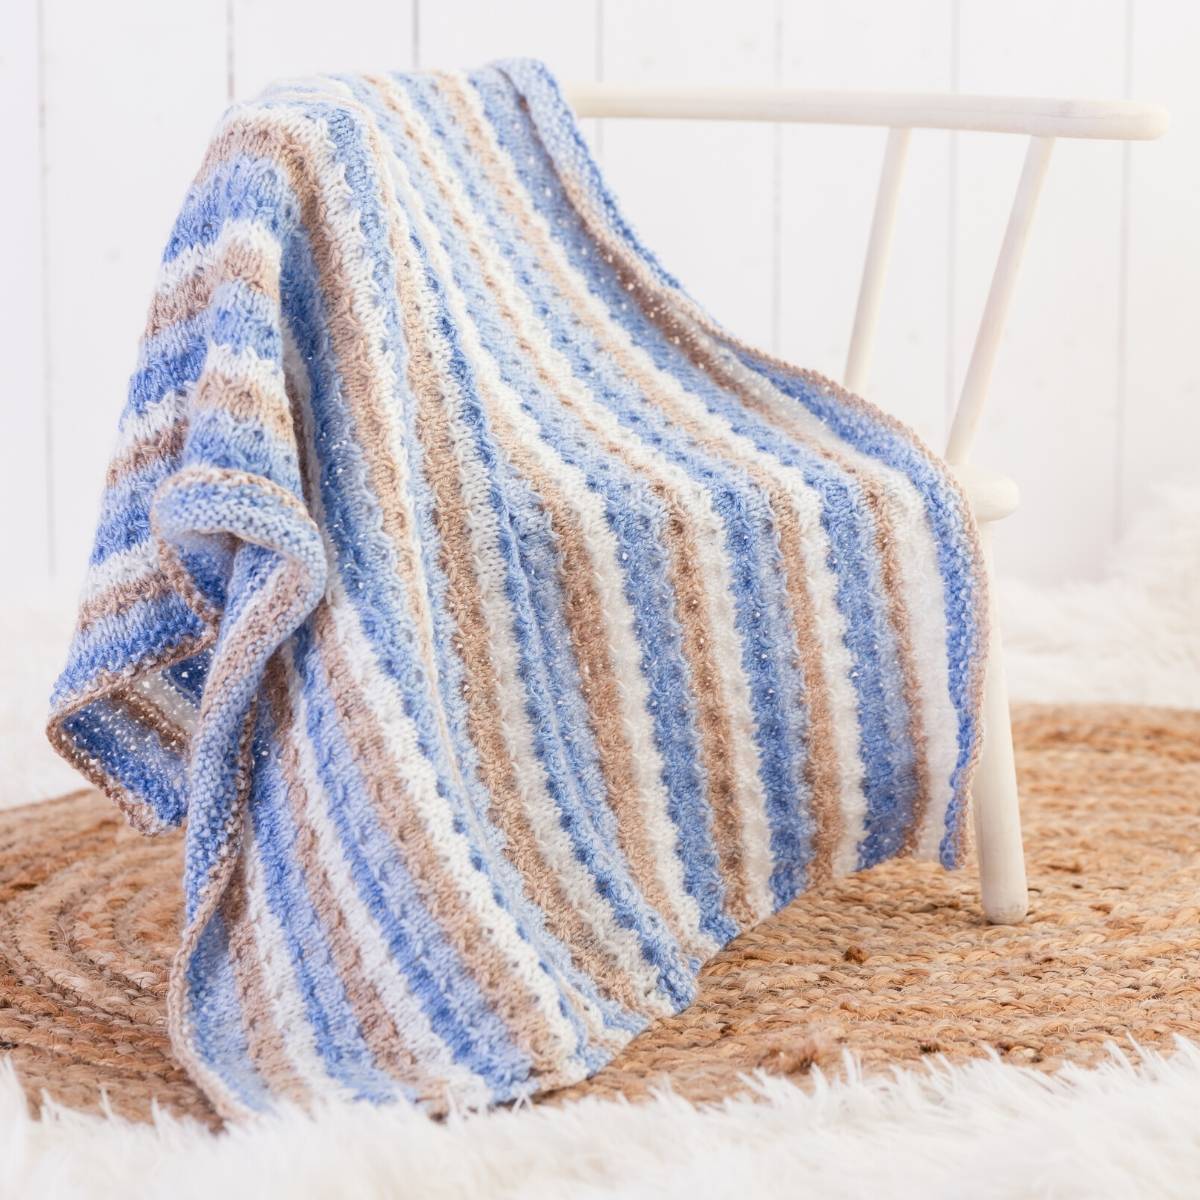 Stripey Cot Blanket Colour Pack - Dodgems Colourway | The Knitting Network